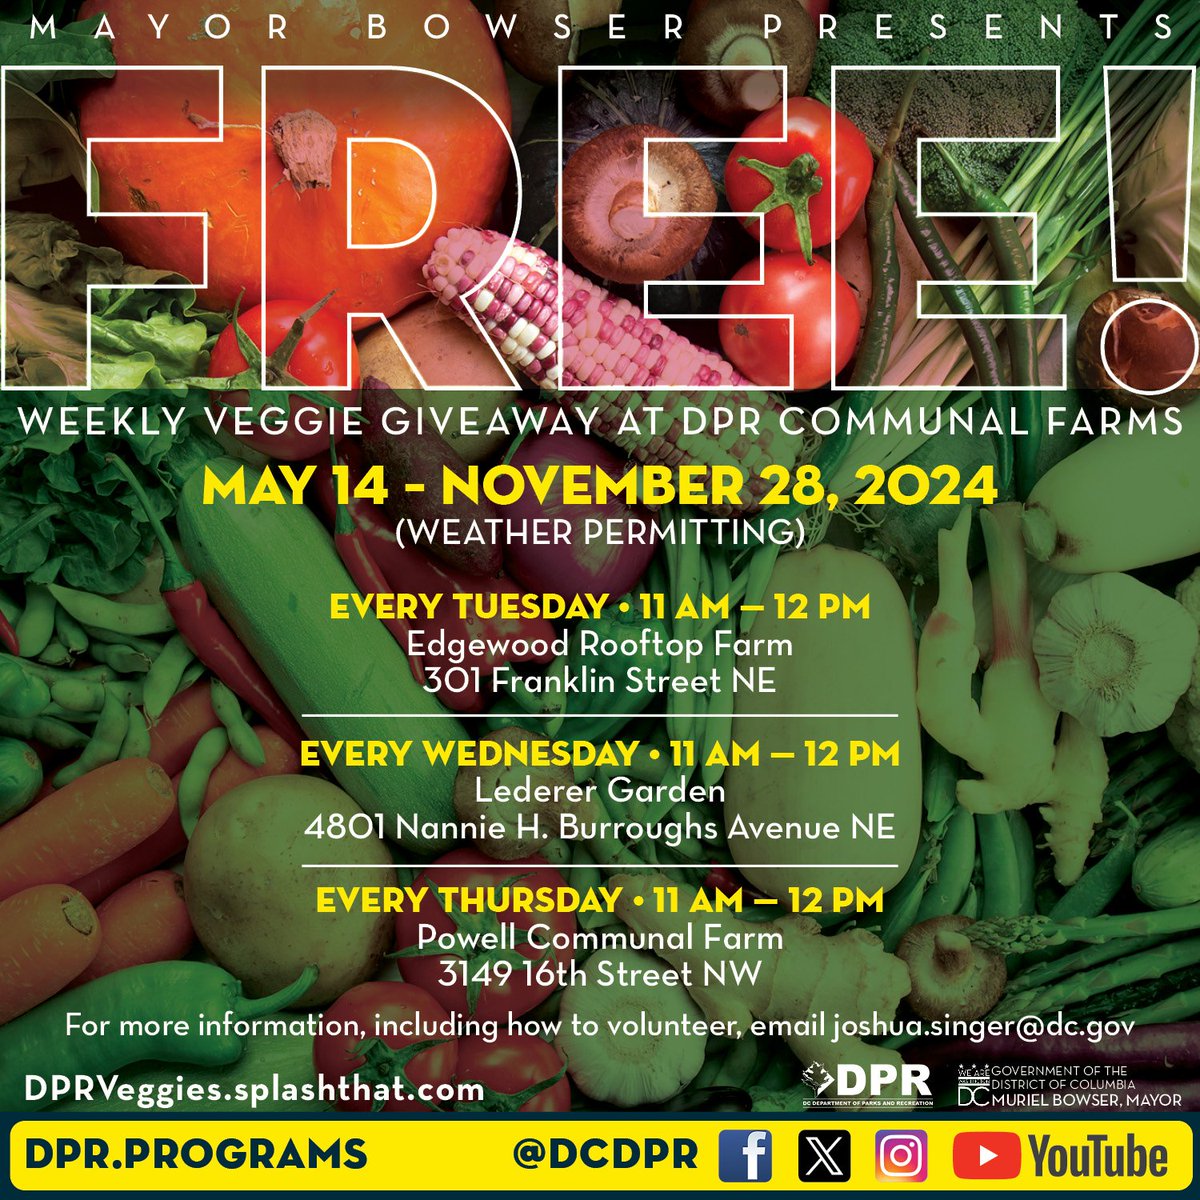 Fresh veggie giveaways are back🥕🥦🫛 Every Tuesday, Wednesday, and Thursday, you can pick up fresh produce at no cost at select @DCDPR communal farms. Learn more and get your veggies ➡️dprveggies.splashthat.com